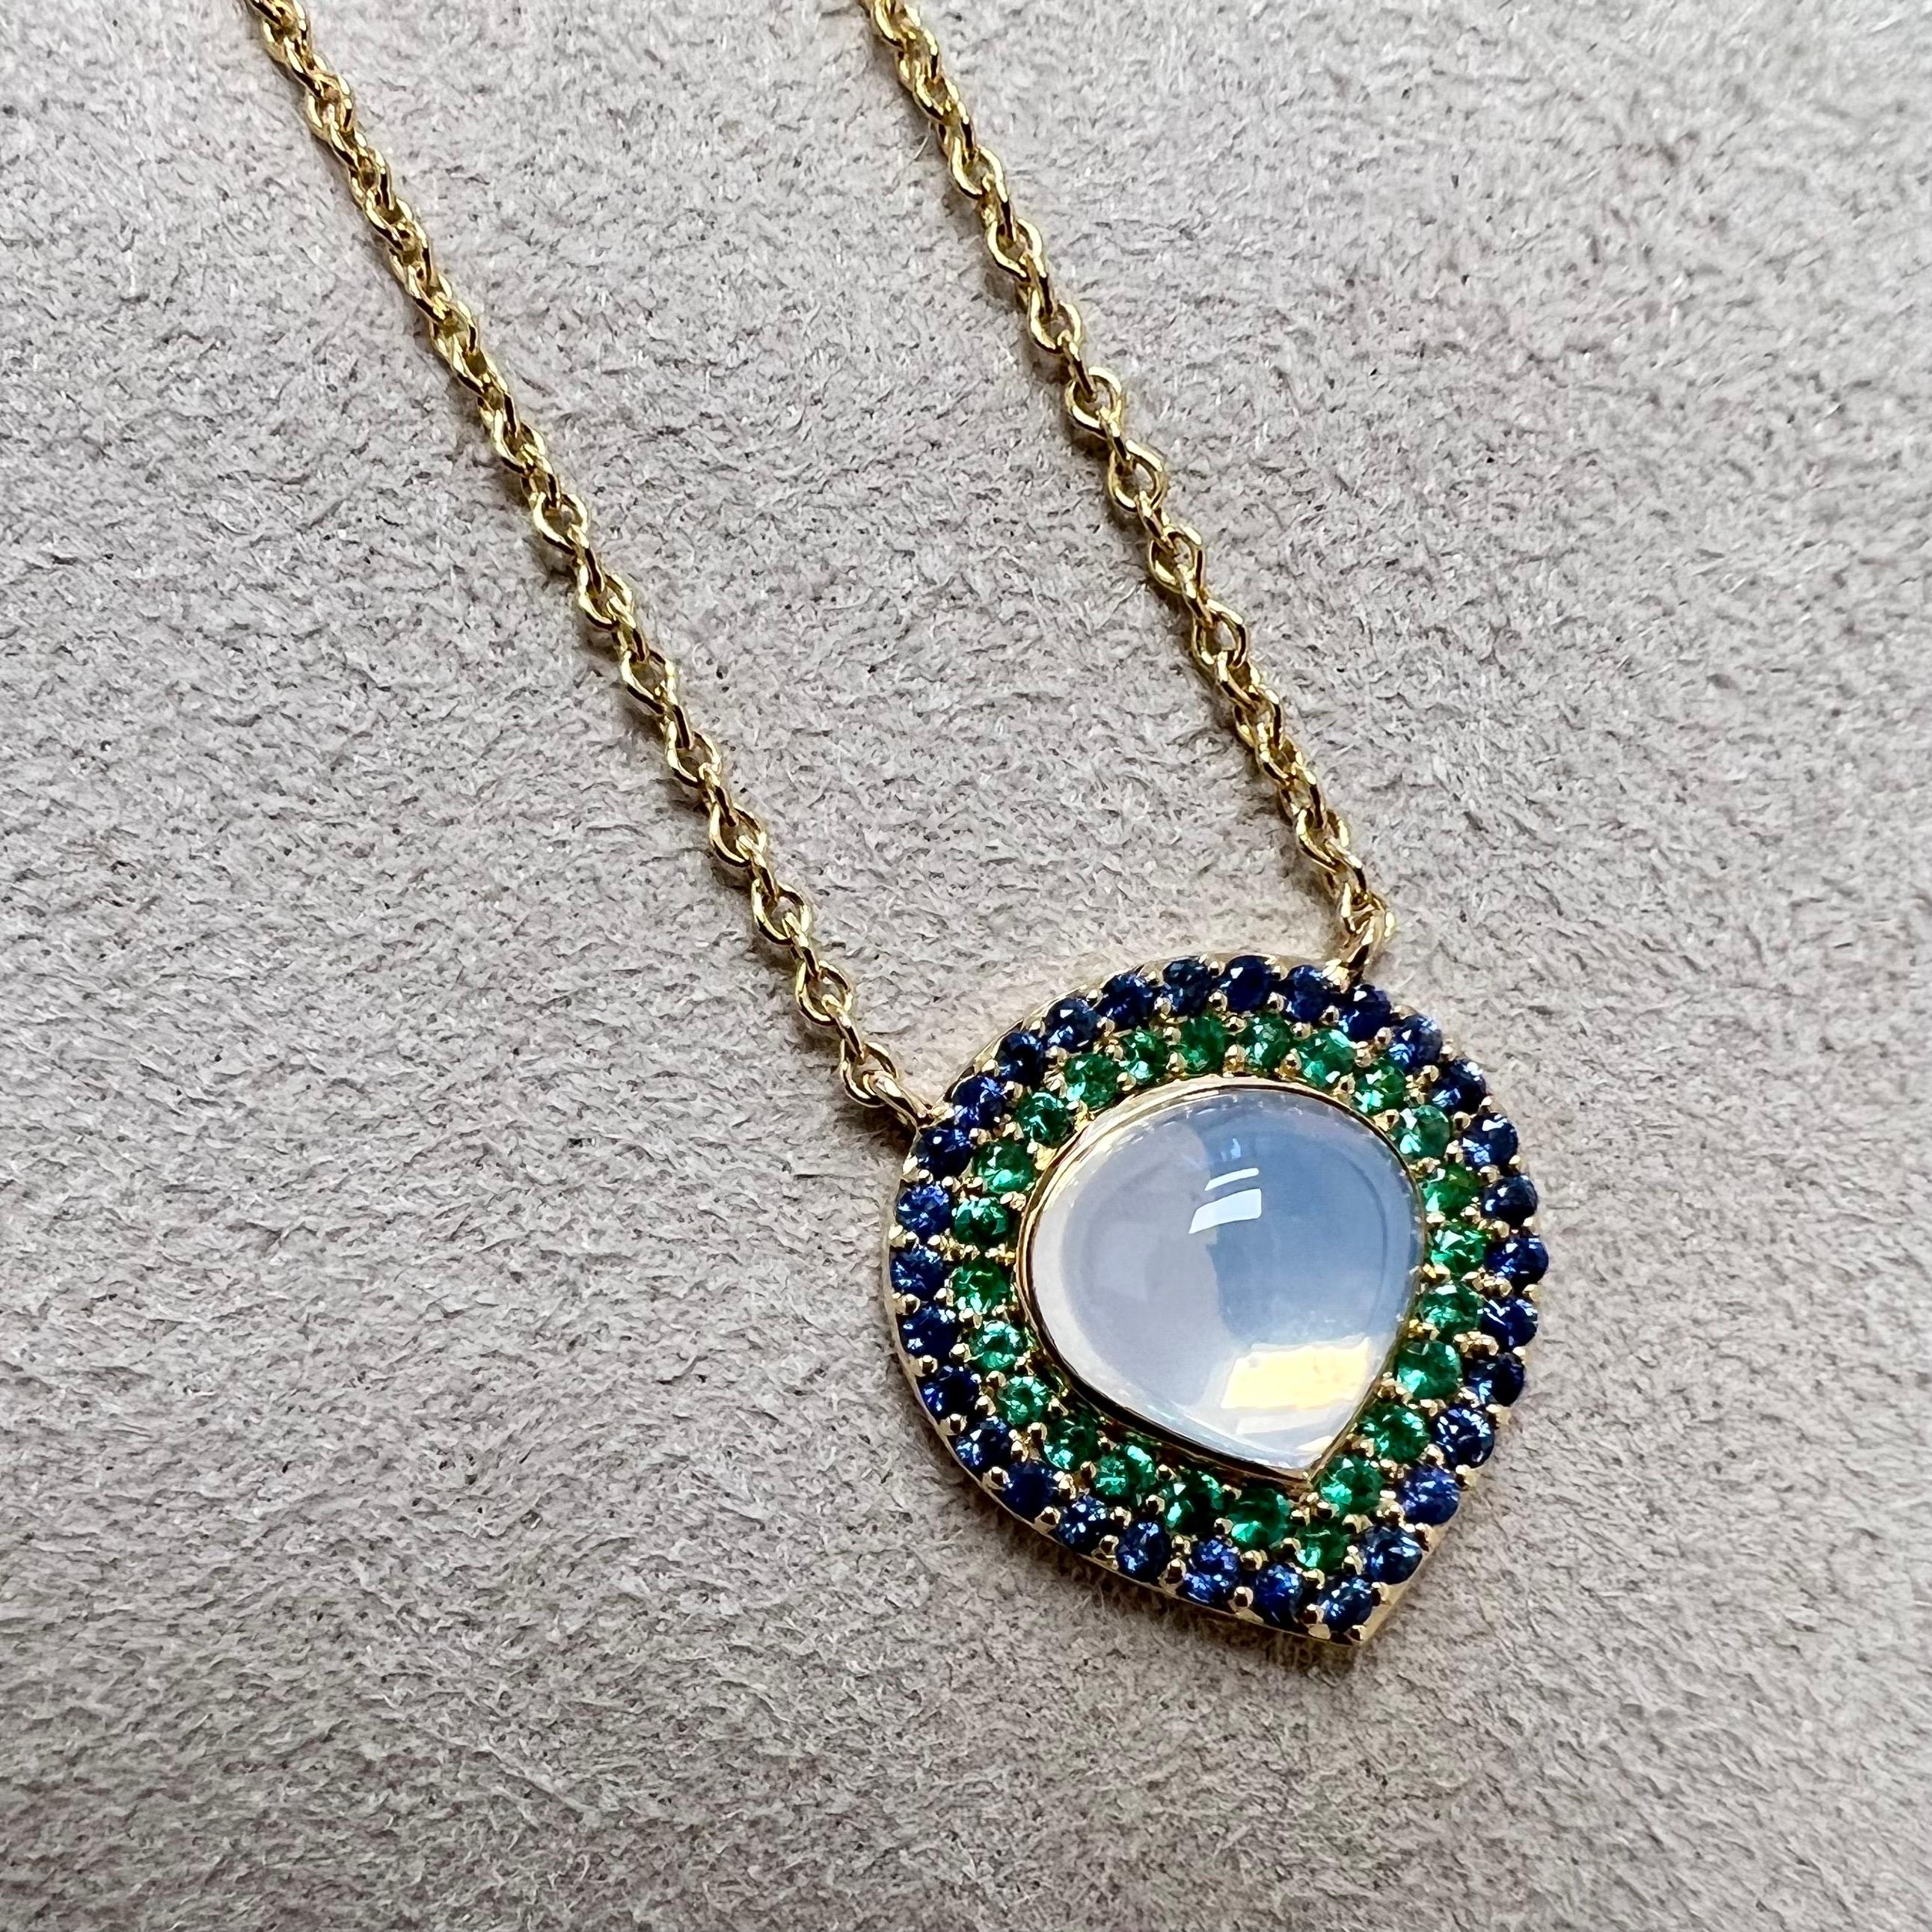 Created in 18 karat yellow gold
Moon quartz 2.50 carats approx.
Emeralds 0.20 carat approx.
Blue sapphires 0.40 carat approx.
18 inch chain with loops at 16 & 17th inch
18 kyg lobster lock

About the Designers ~ Dharmesh & Namrata

Drawing